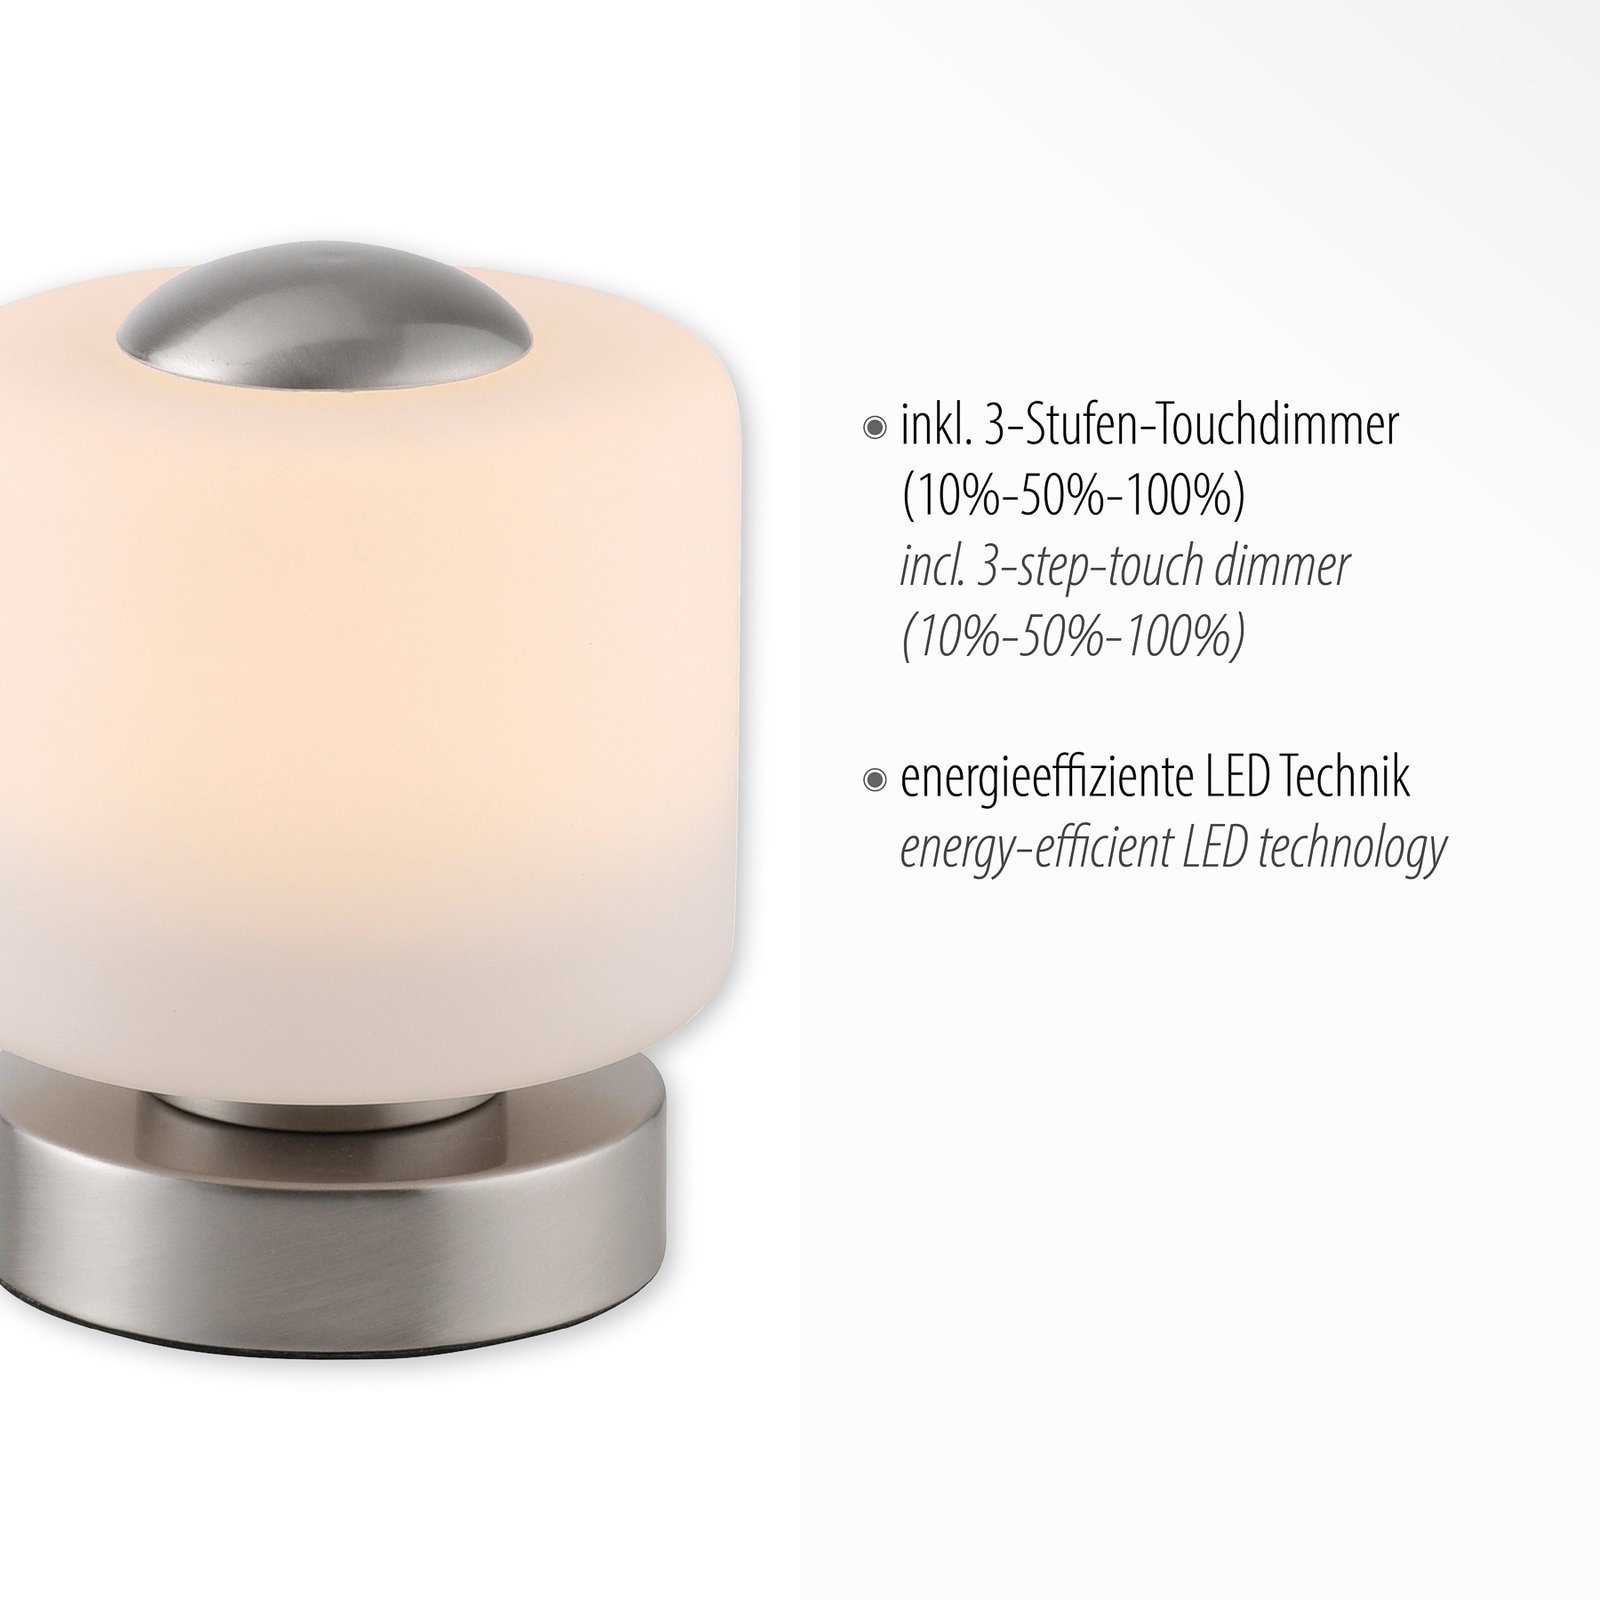 Bota LED table lamp, dimmable, steel